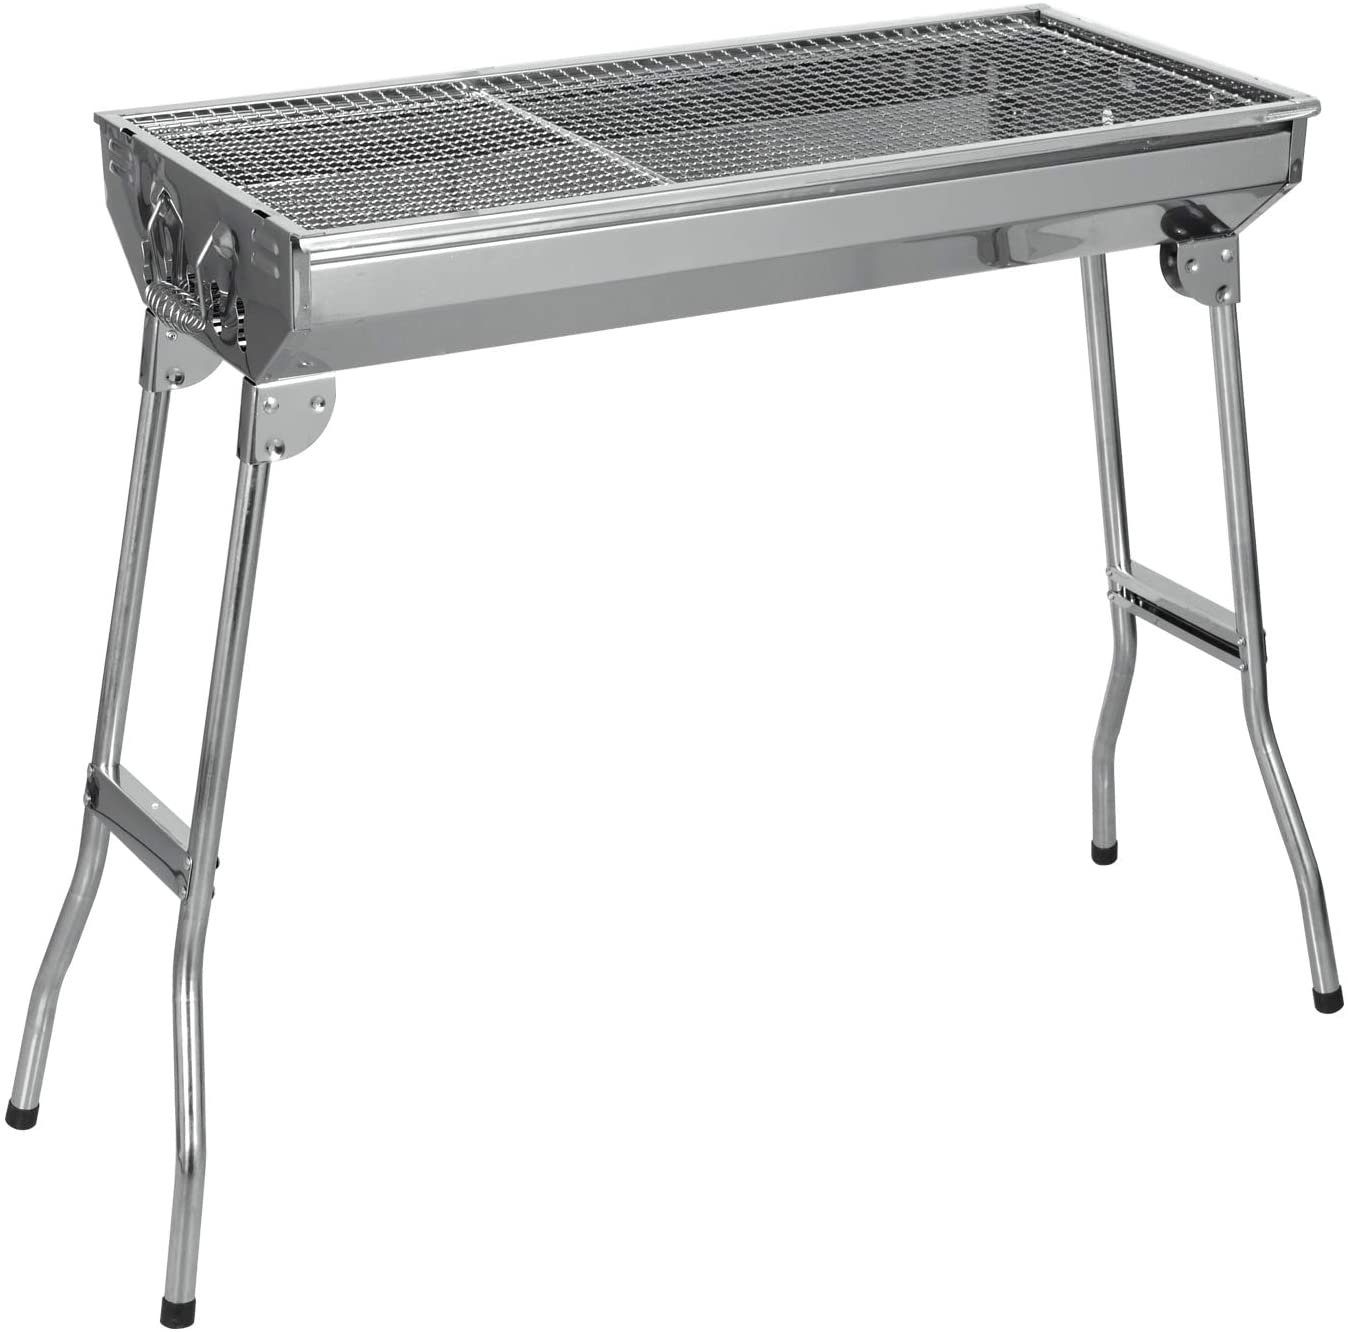 BBQ Edelstahl Grill Holzkohlegrill Camping Standgrill Tragbar Klappgrill Outdoor 